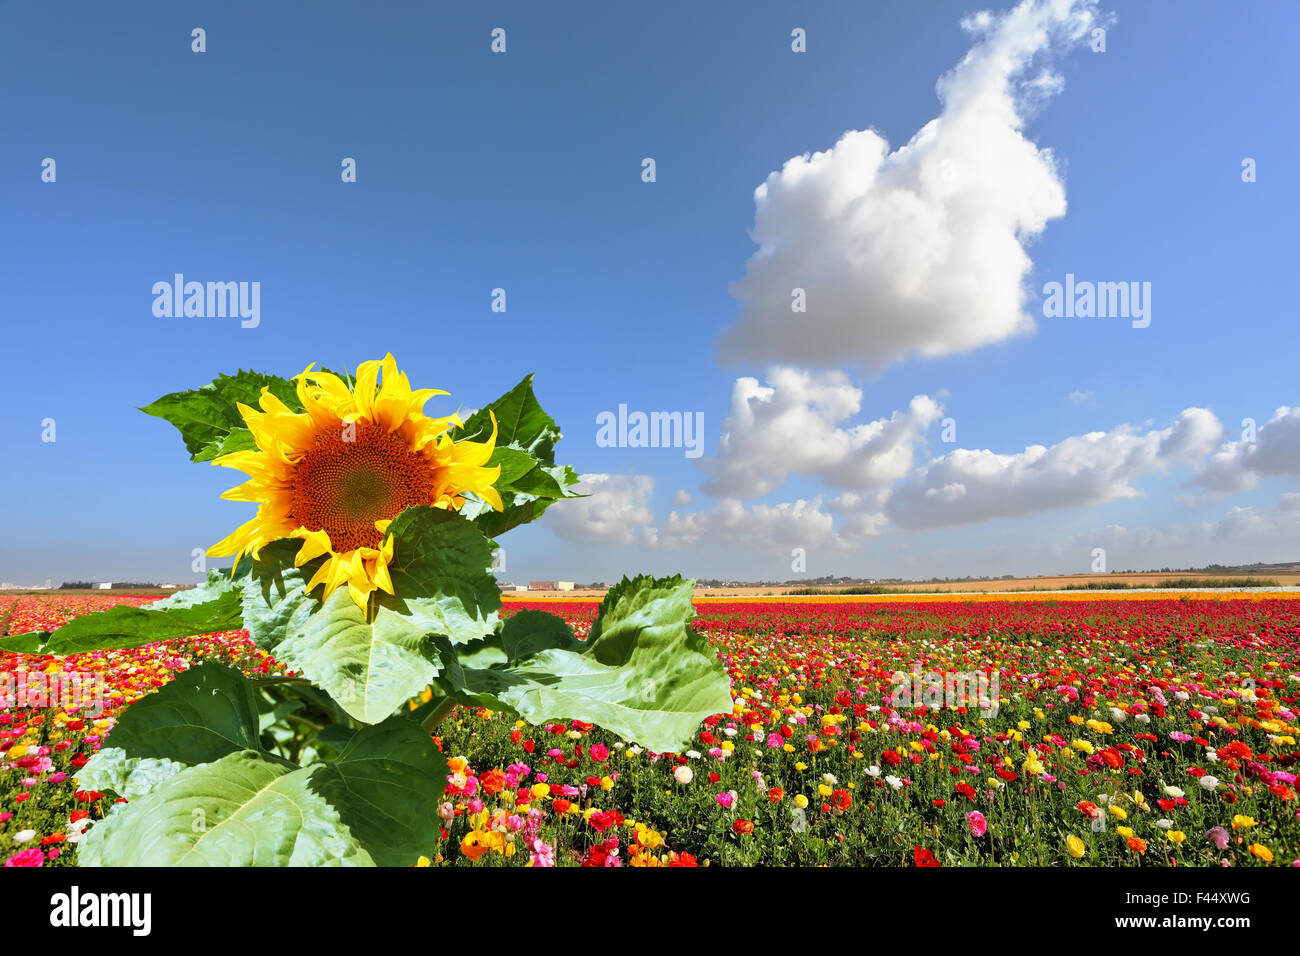 The sunflower grows in a field Stock Photo